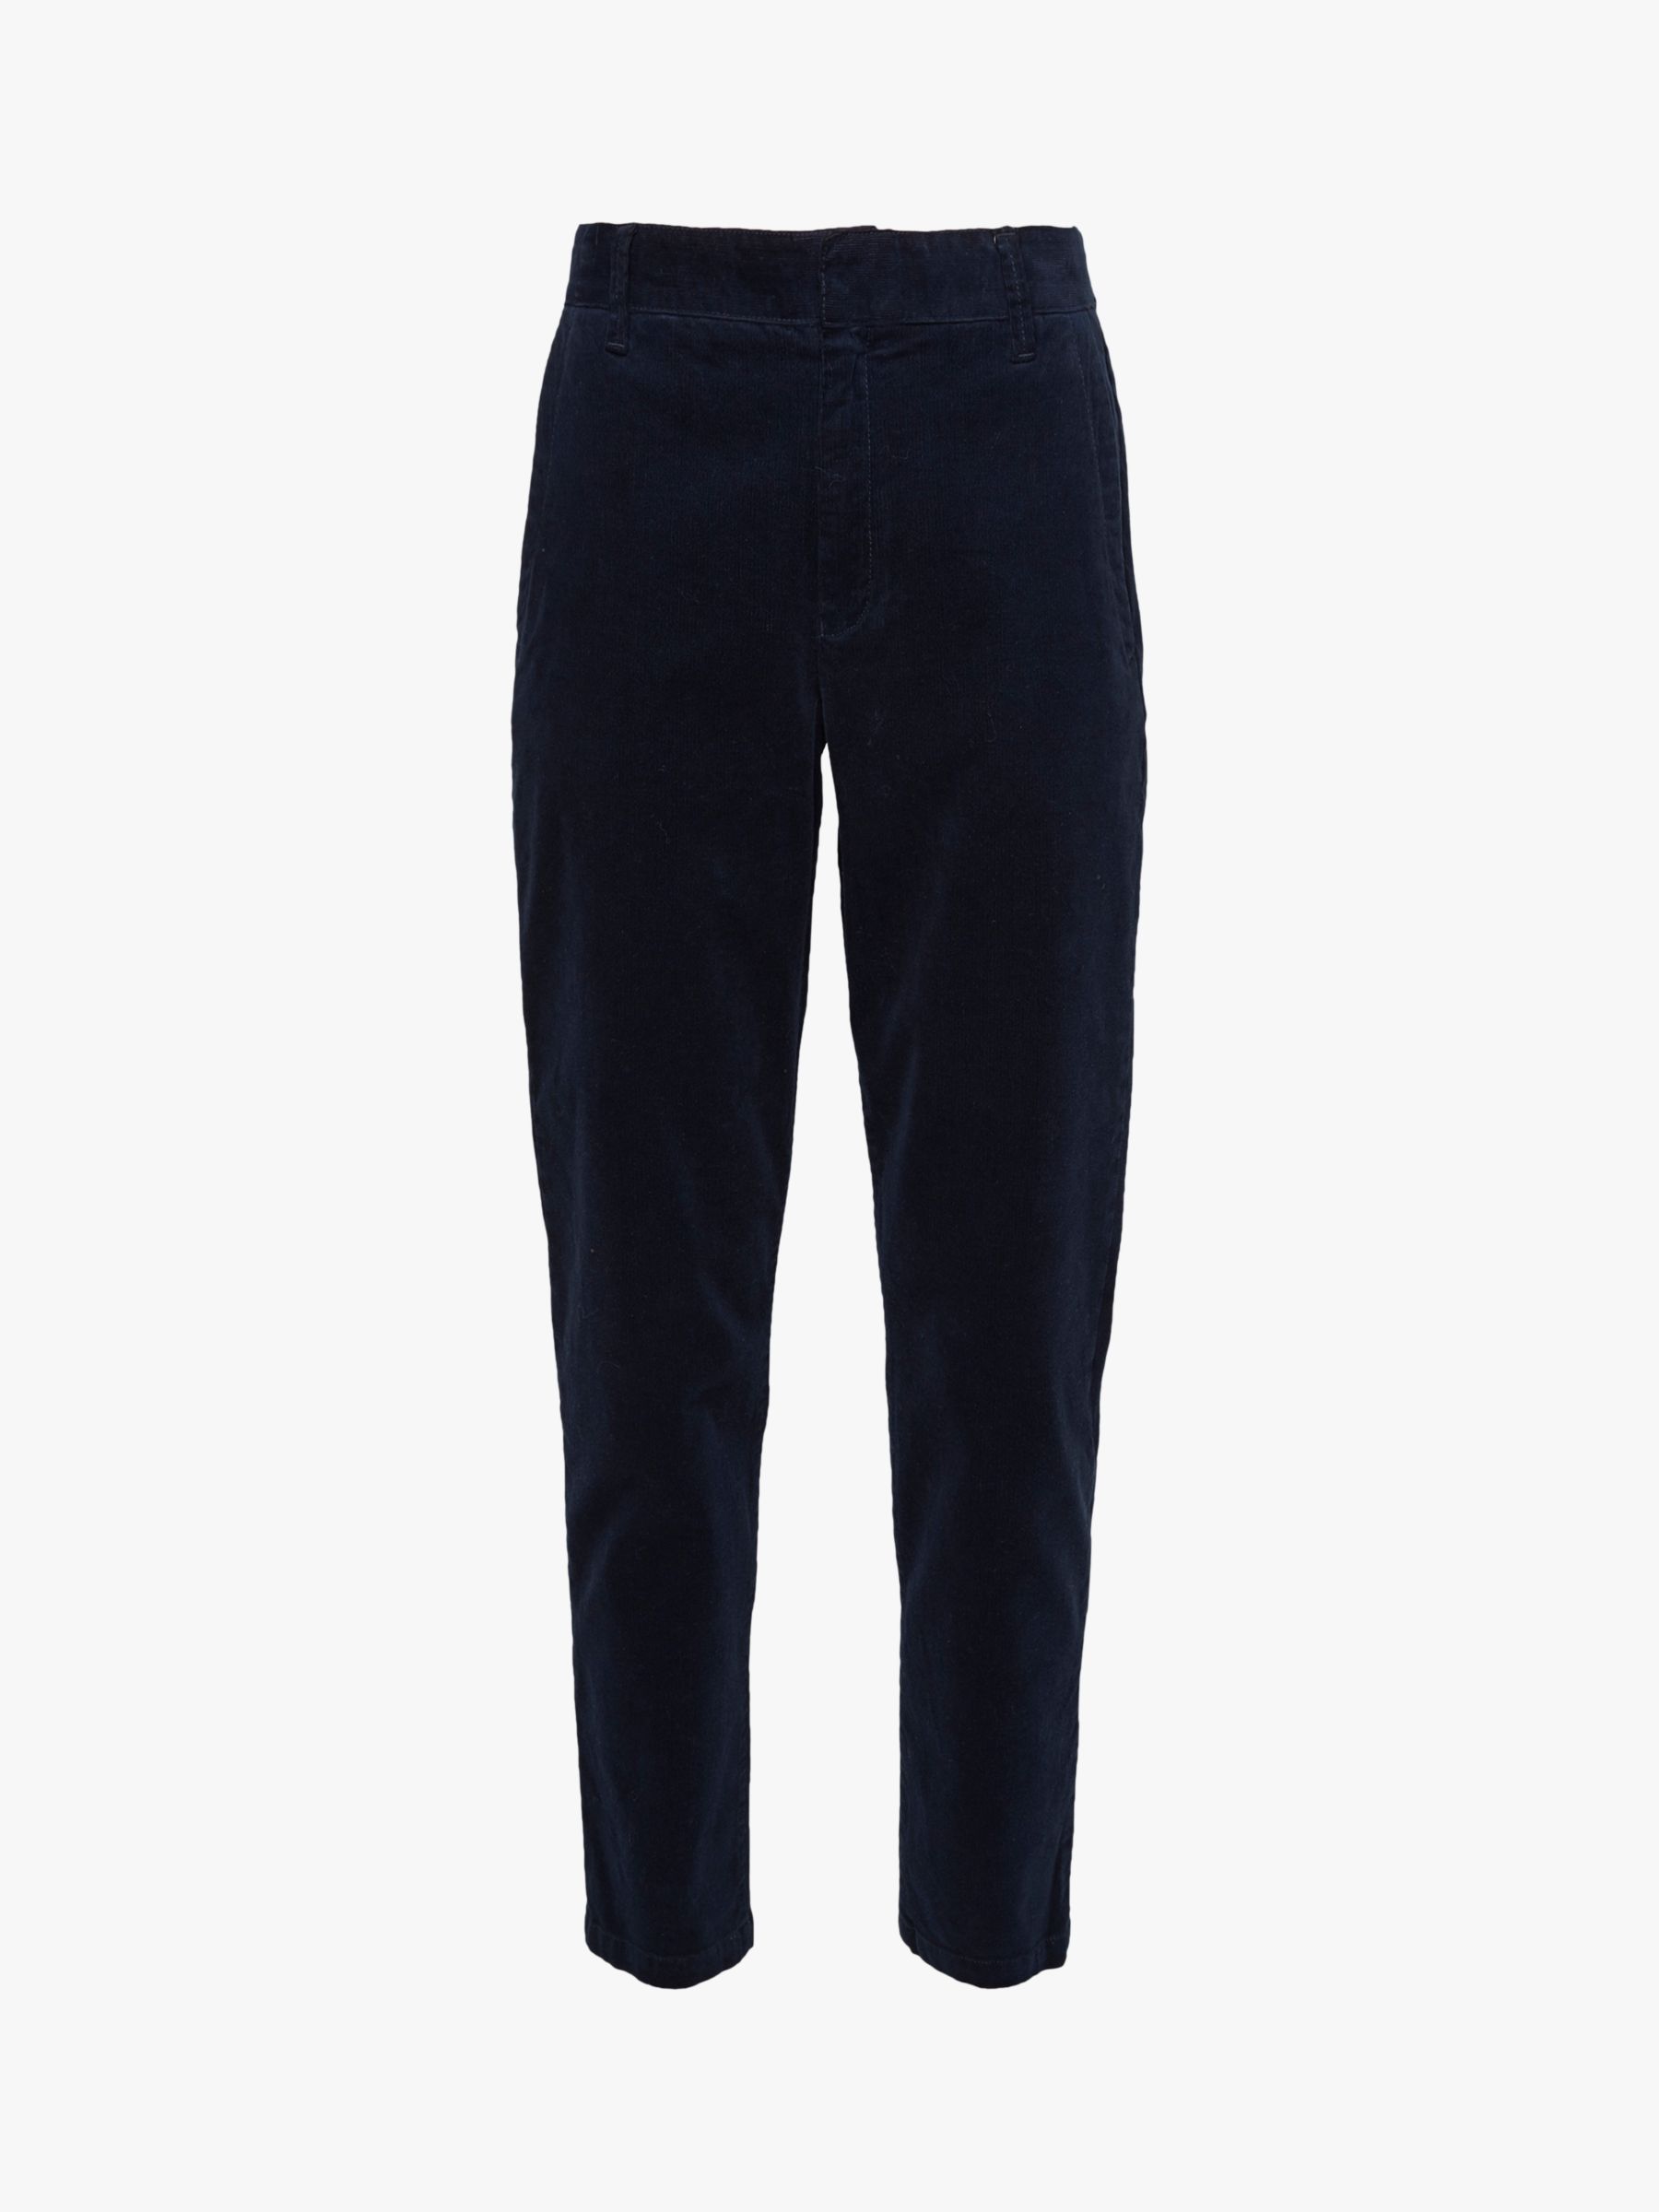 French Connection Dawn Tapered Trousers, Utility Blue at John Lewis ...